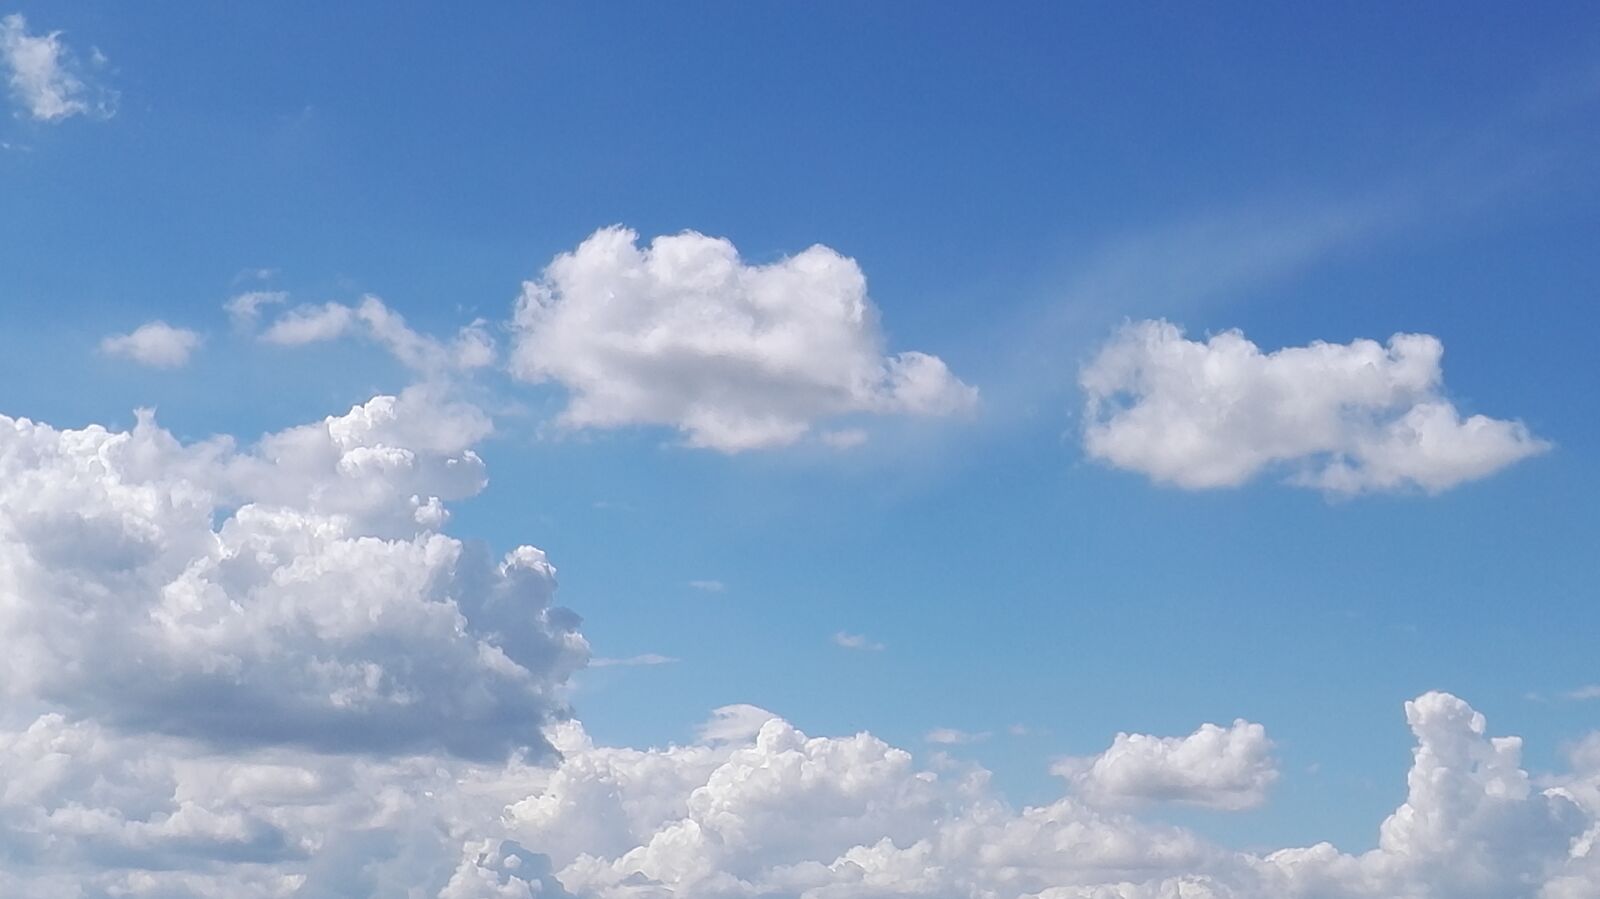 HUAWEI Honor 7 sample photo. Sky, clouds, white cloud photography